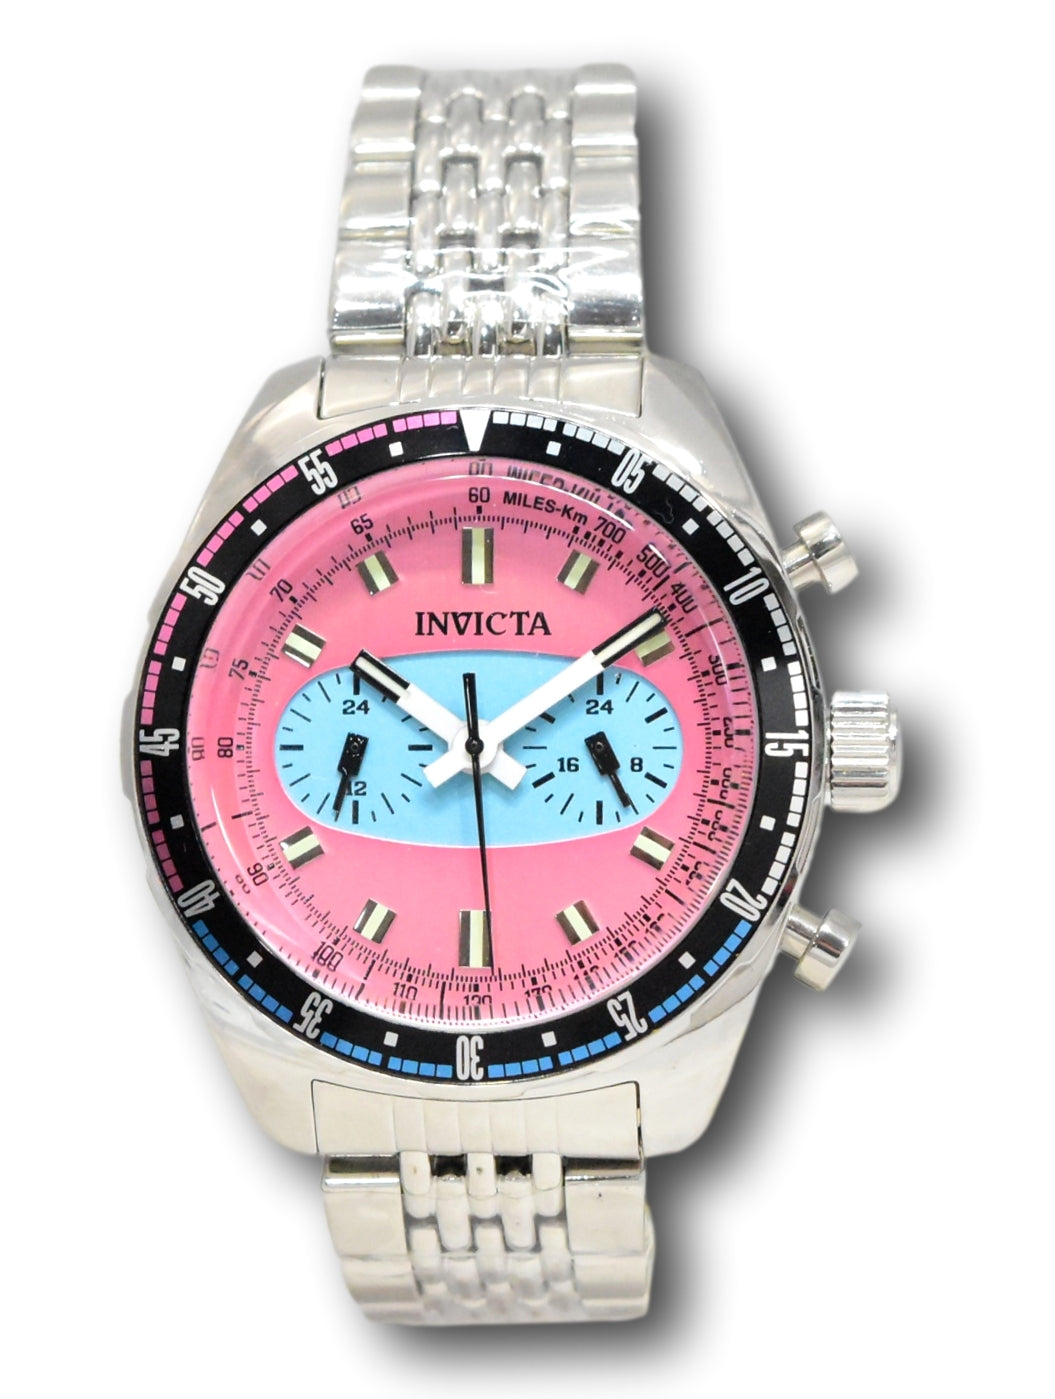 Invicta Speedway Monaco Men's 43mm Dual Time Pink / Blue Stainless Watch  43096